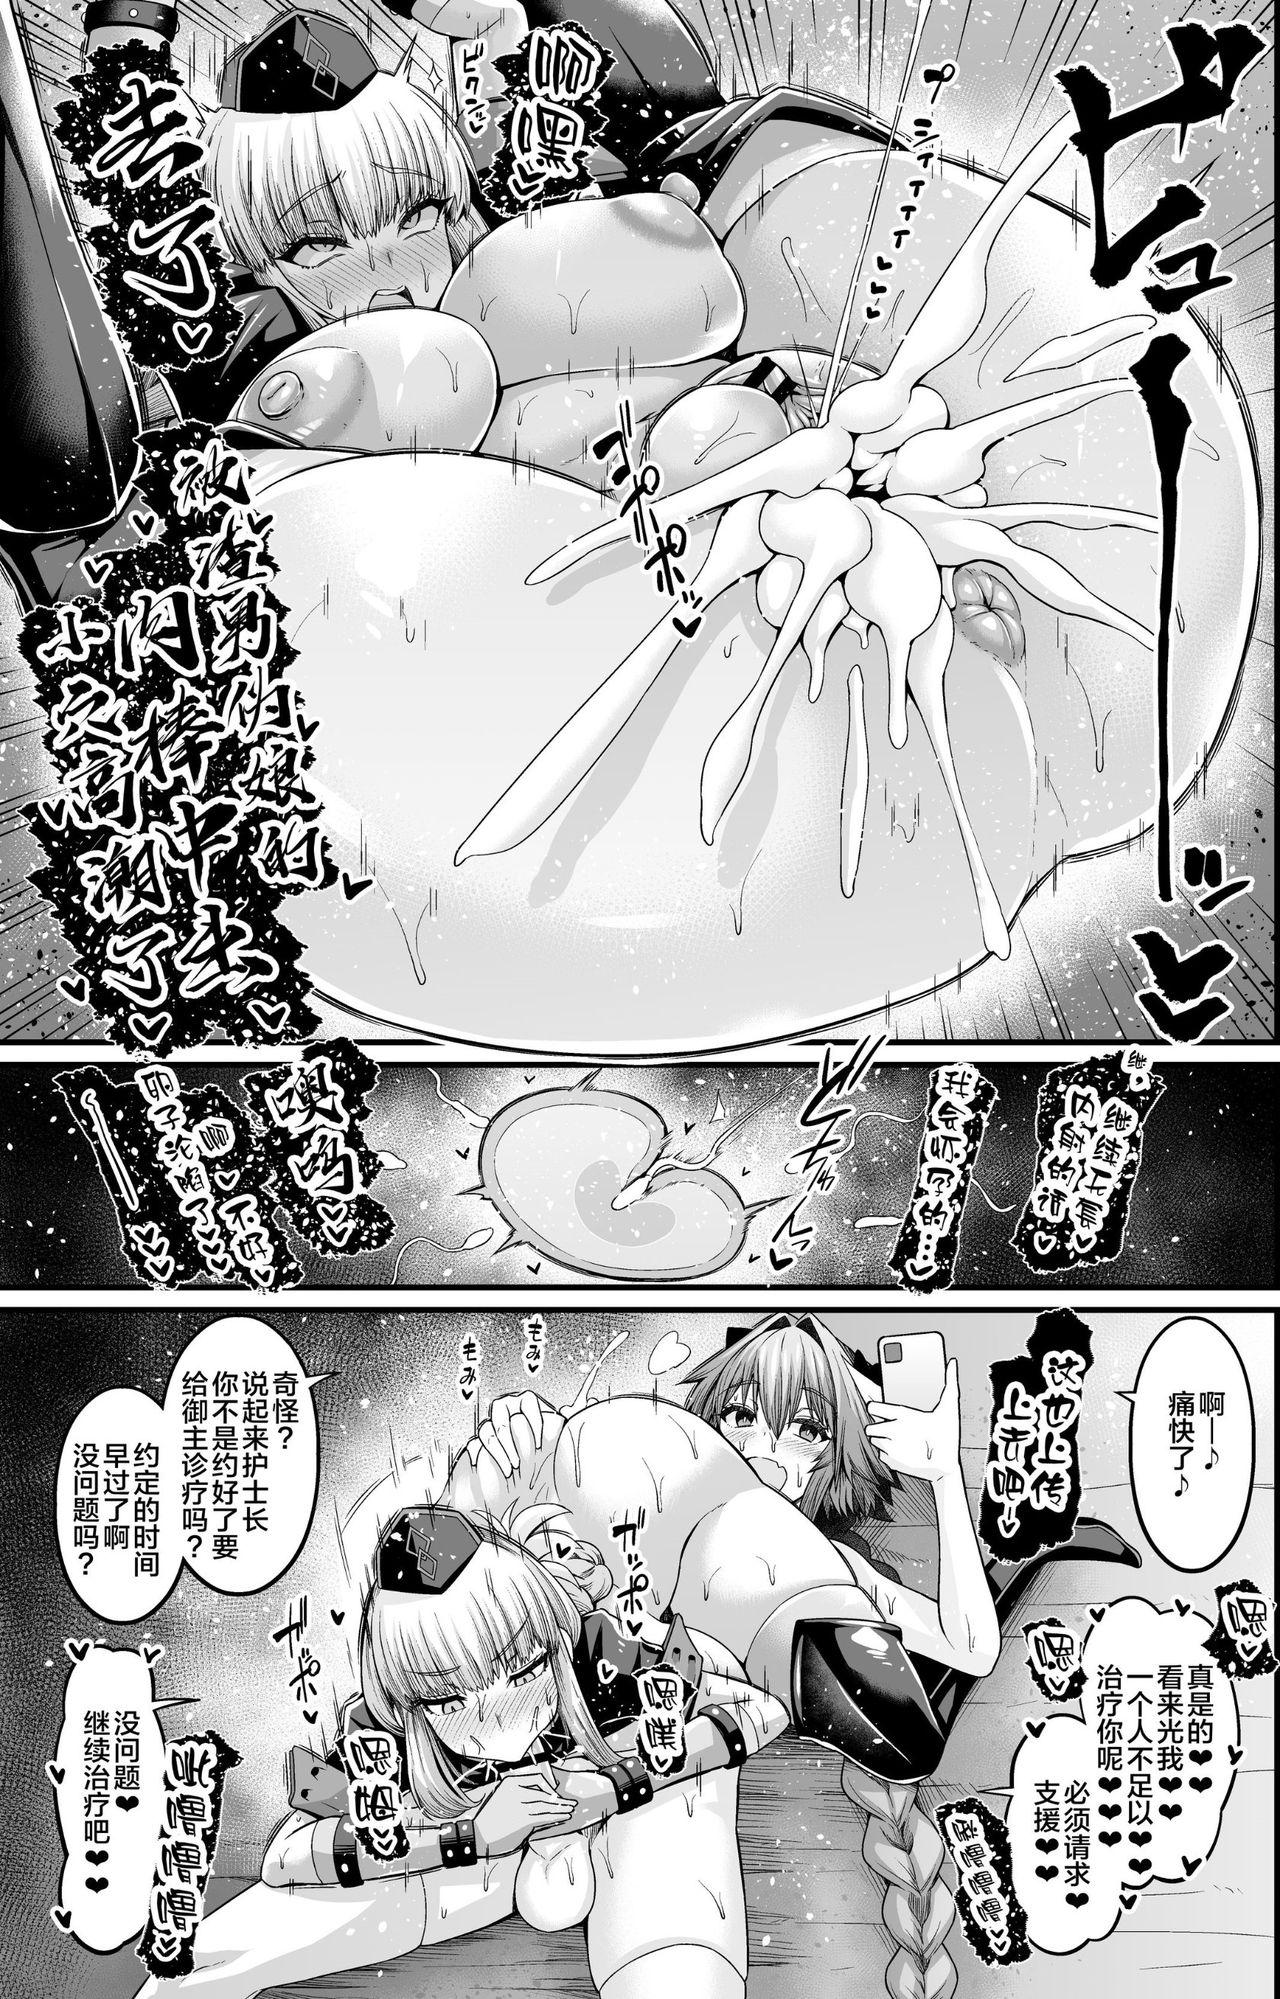 Cumshots Ankoman collection - Fate grand order Free Blowjob Porn - Page 12